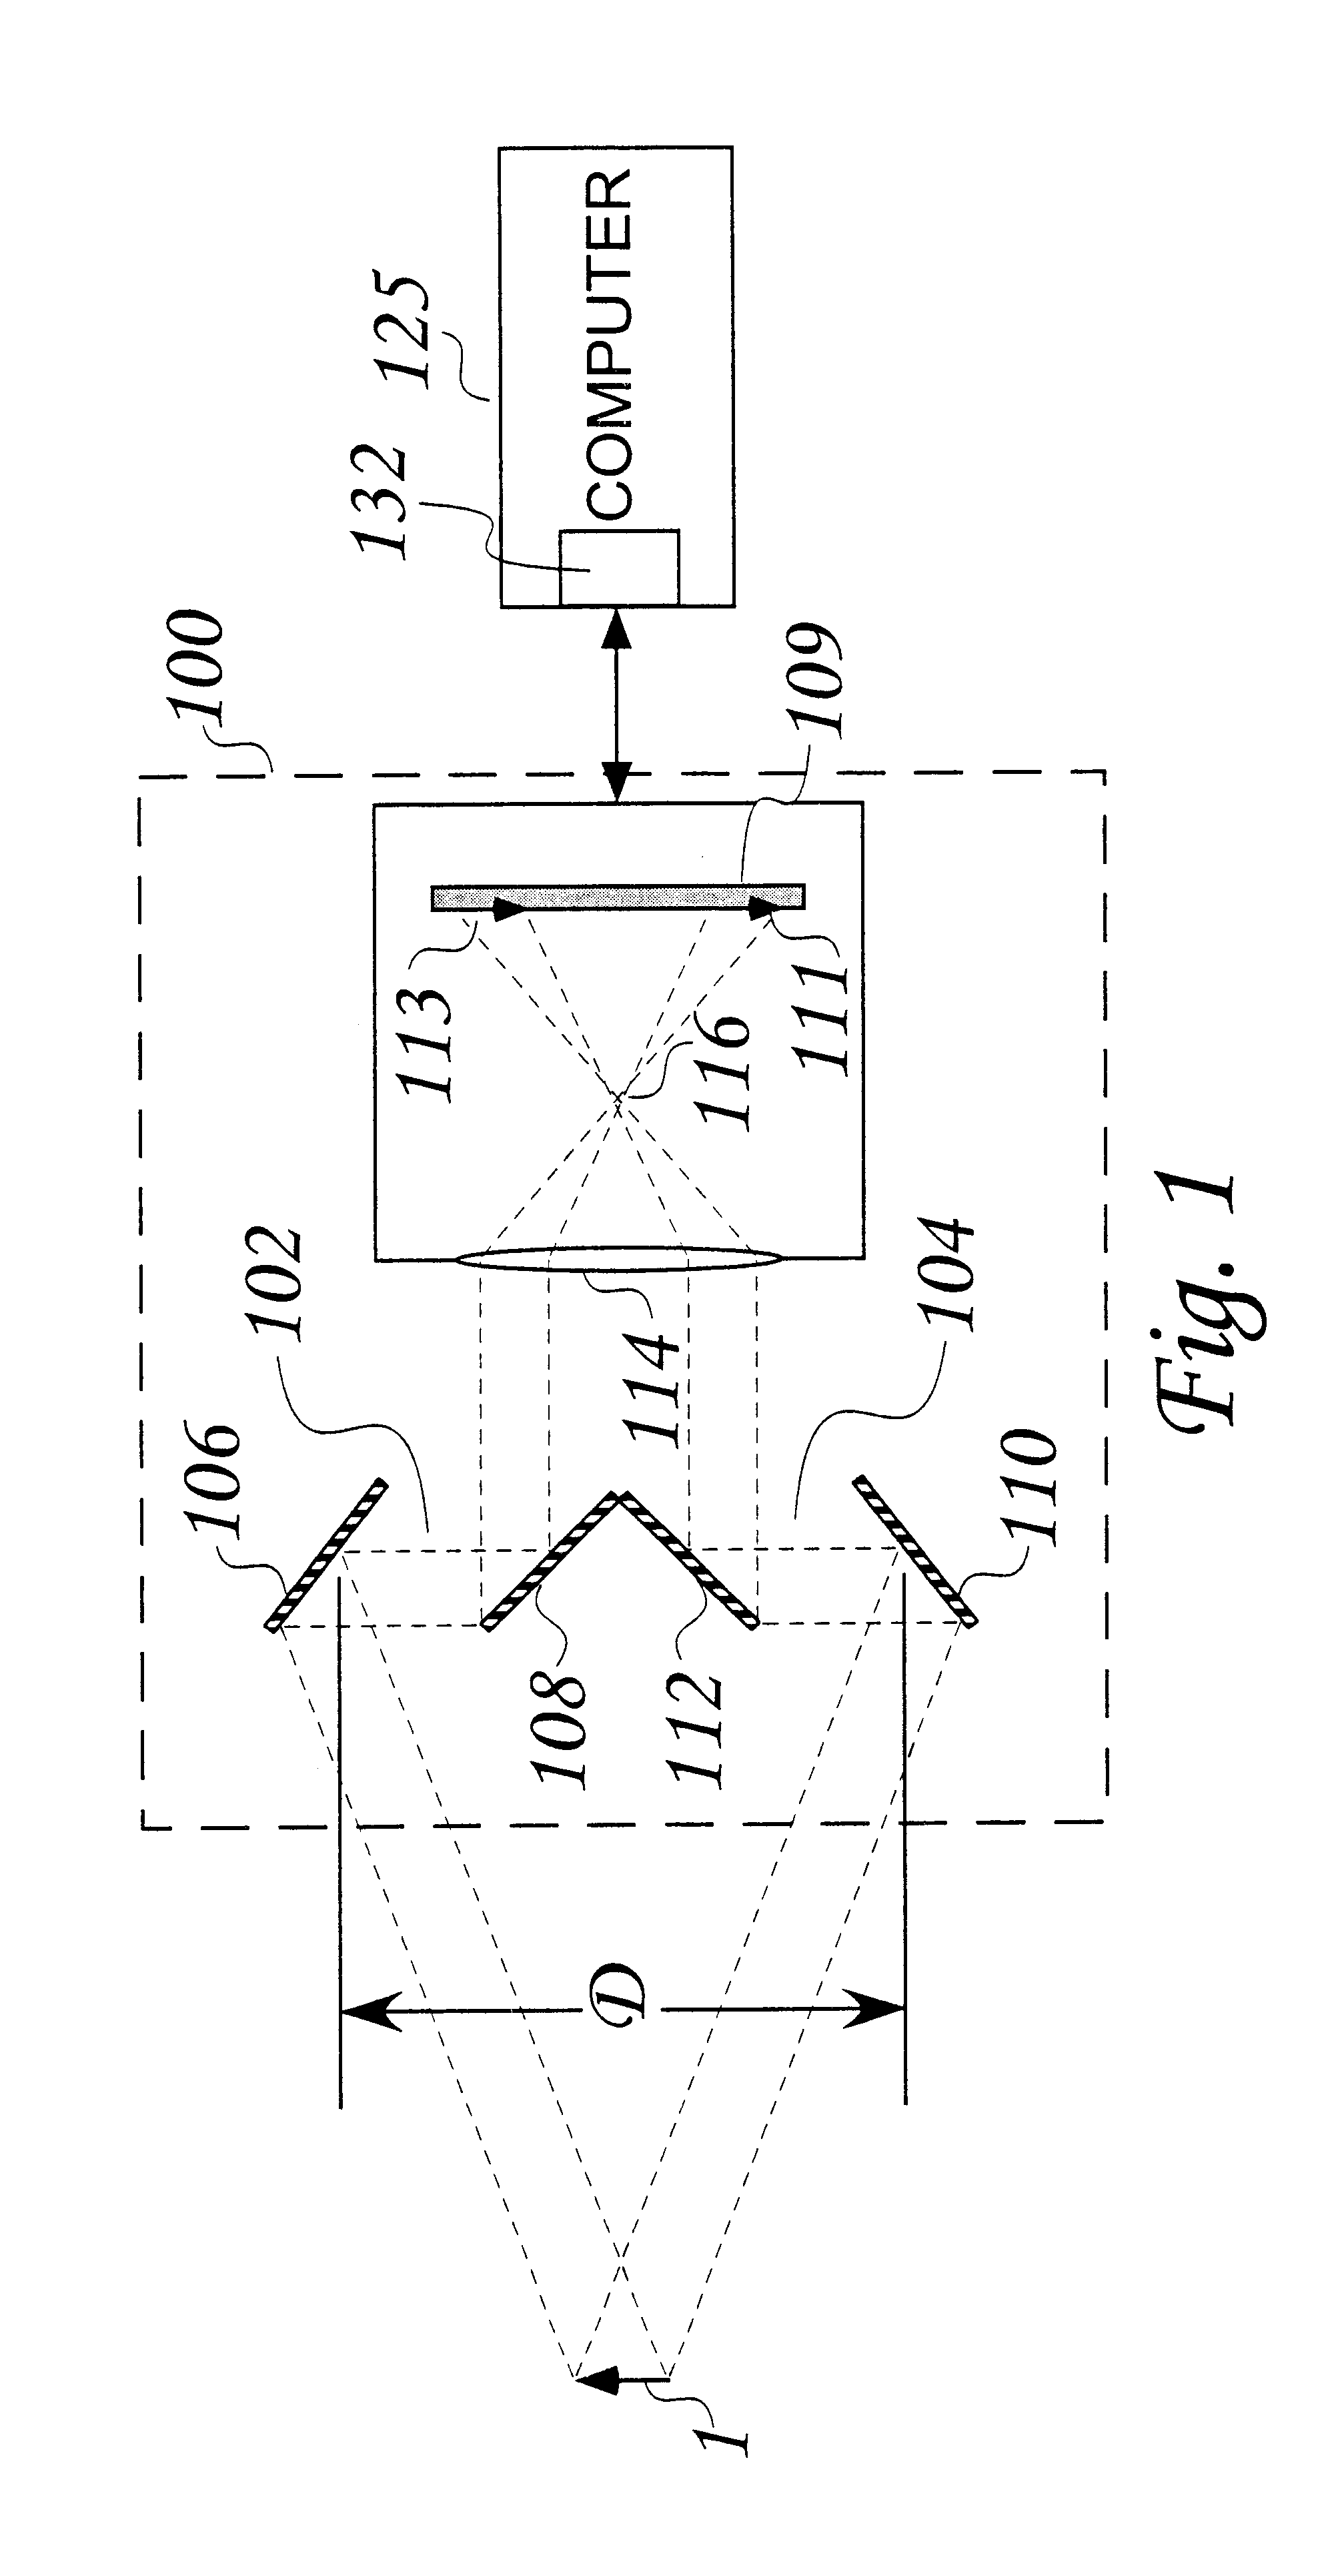 Apparatus and method for lesion feature identification and characterization